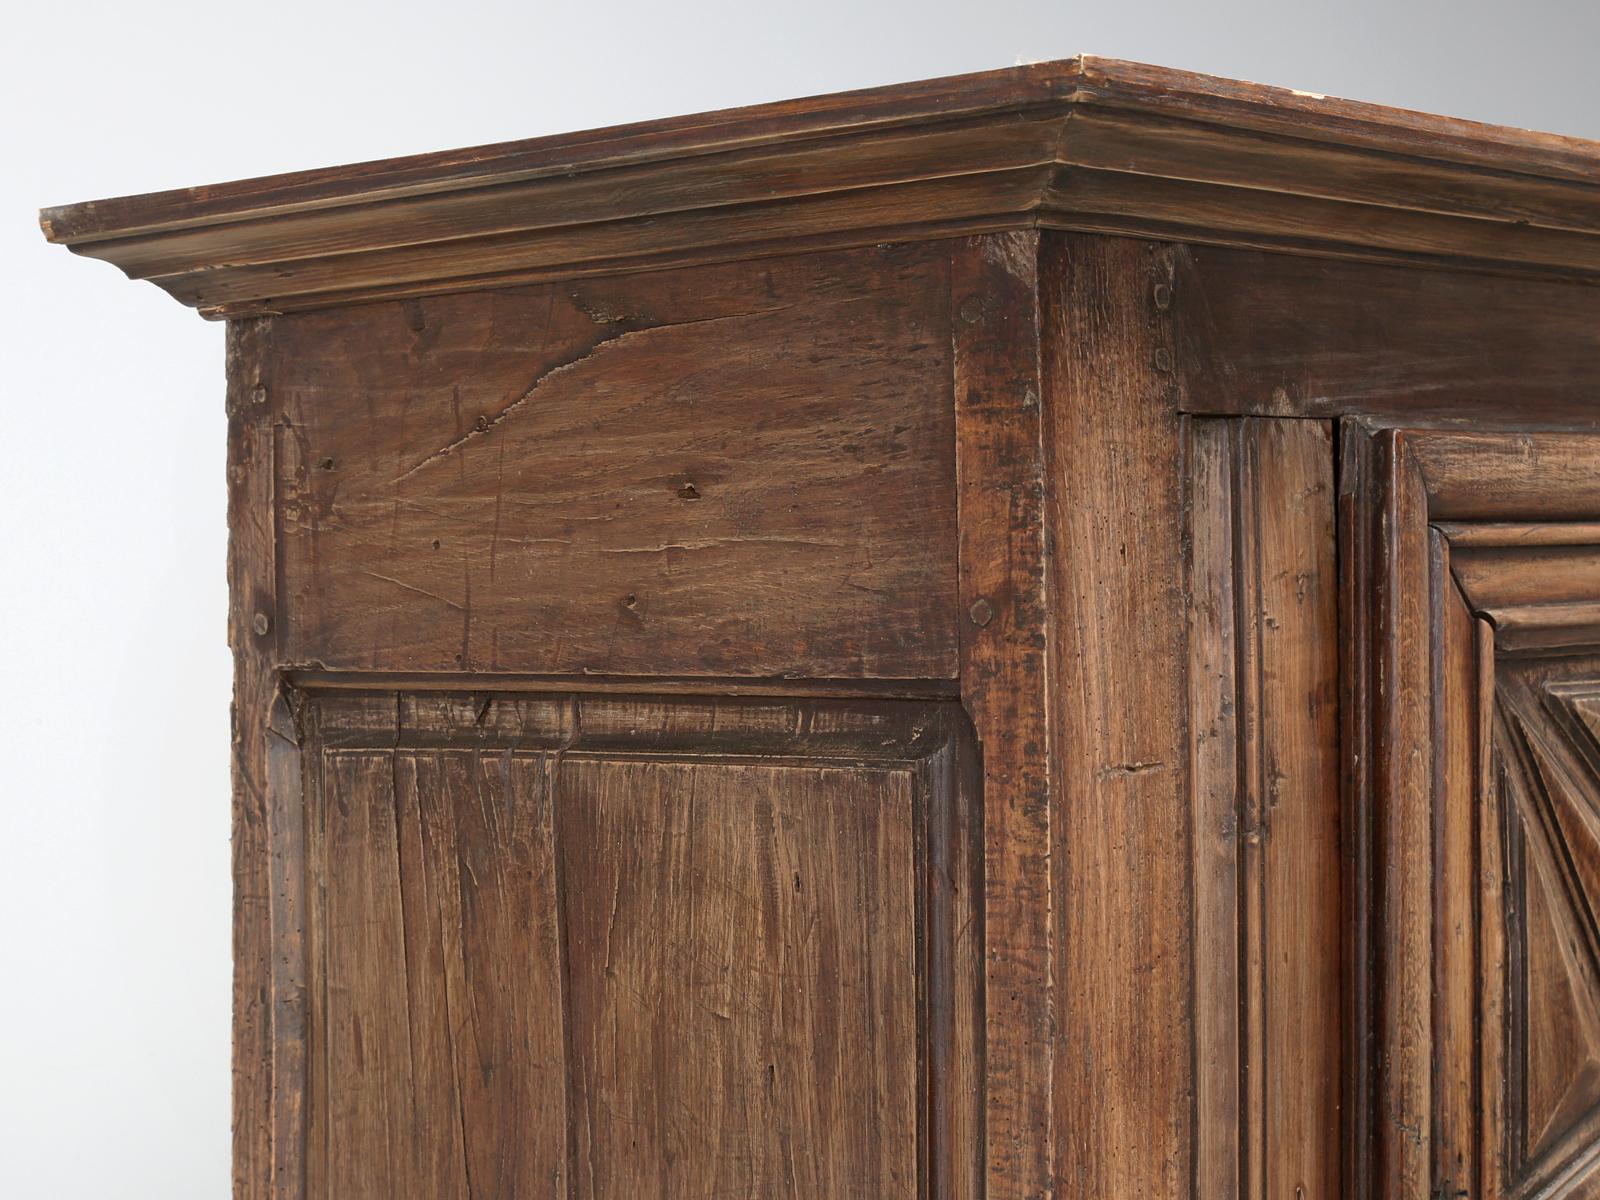 Hand-Crafted Antique French Bonnetiere or Petite Armoire or Cabinet in Original Condition